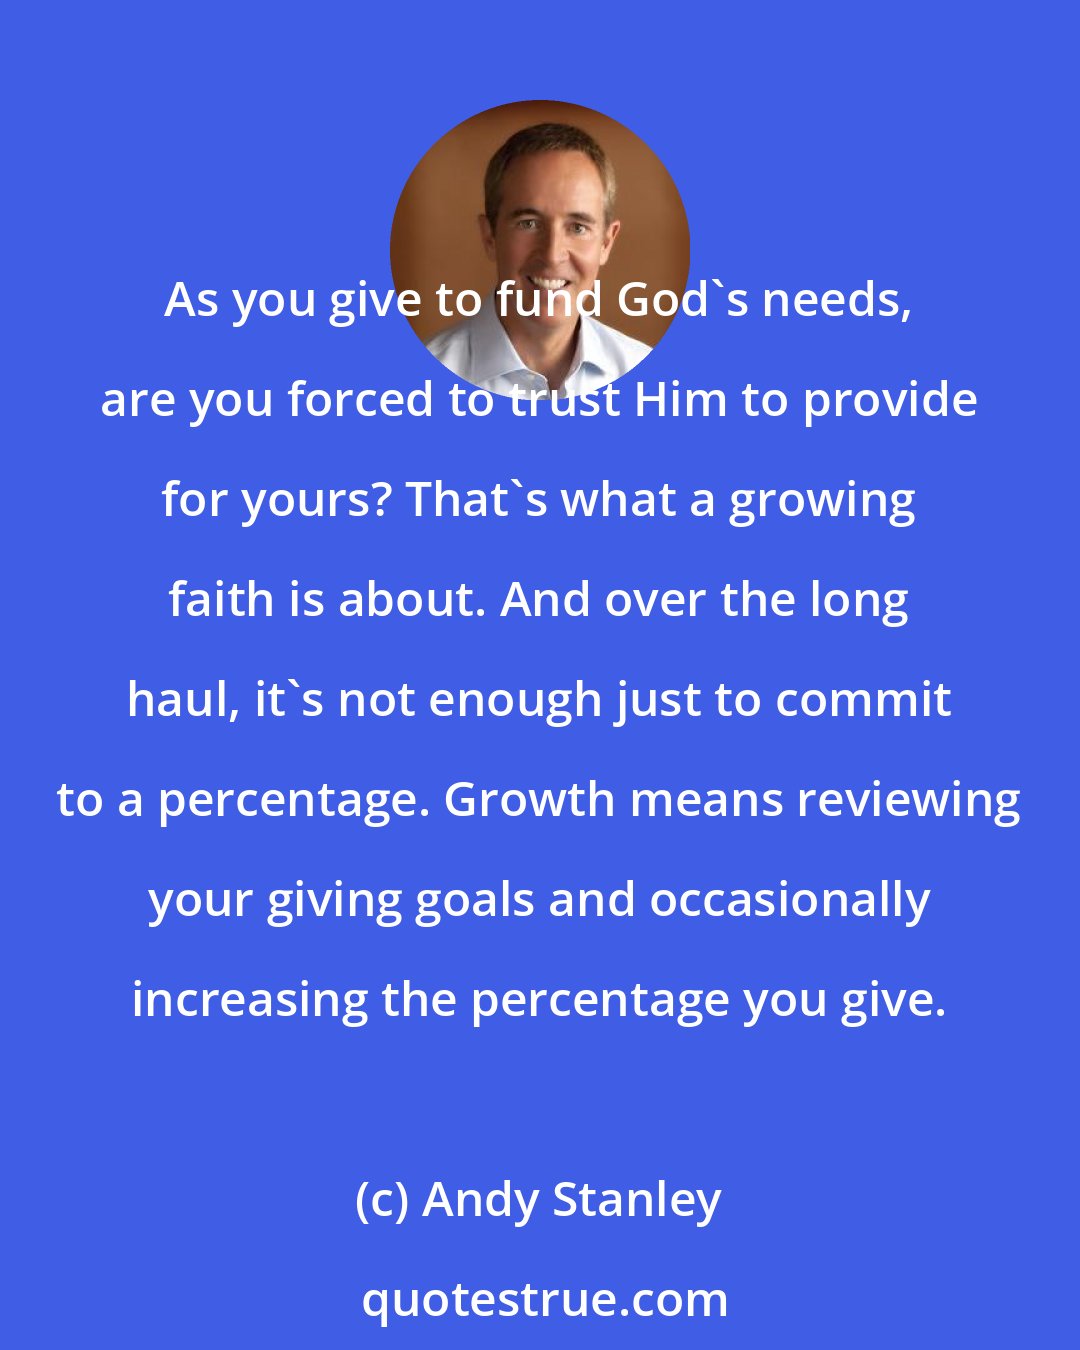 Andy Stanley: As you give to fund God's needs, are you forced to trust Him to provide for yours? That's what a growing faith is about. And over the long haul, it's not enough just to commit to a percentage. Growth means reviewing your giving goals and occasionally increasing the percentage you give.